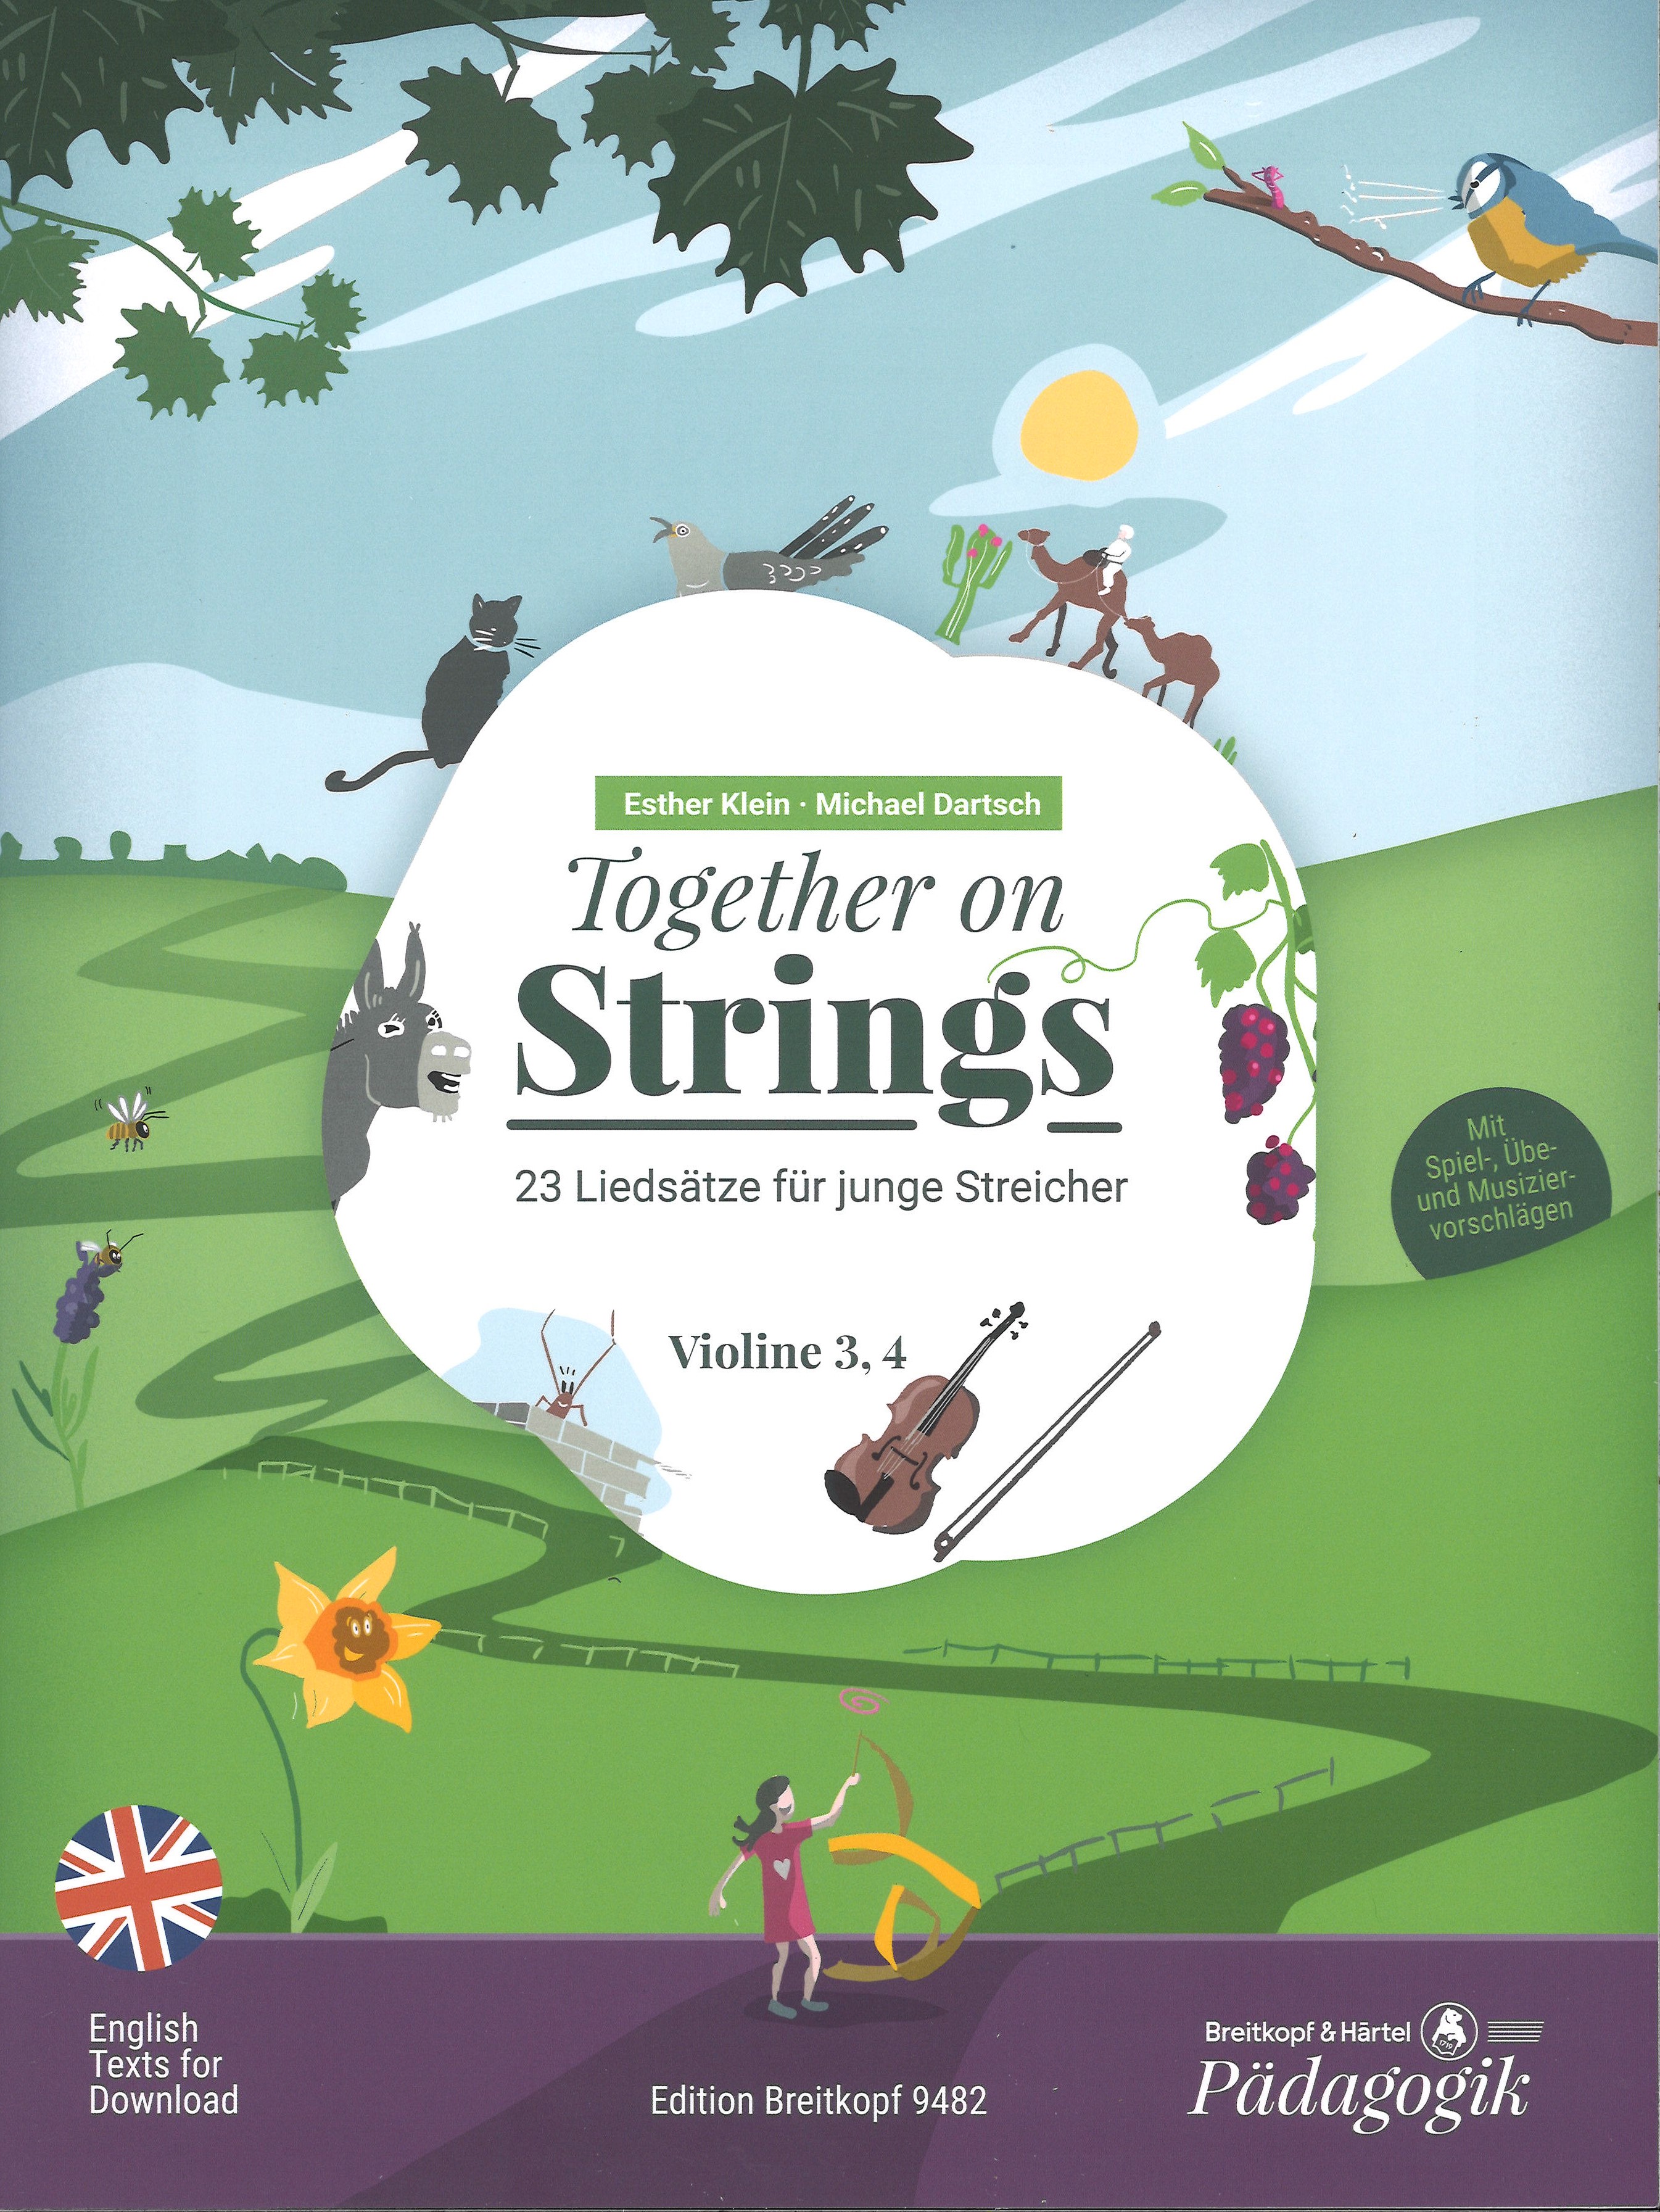 Together On Strings Violin 3 & 4 Sheet Music Songbook